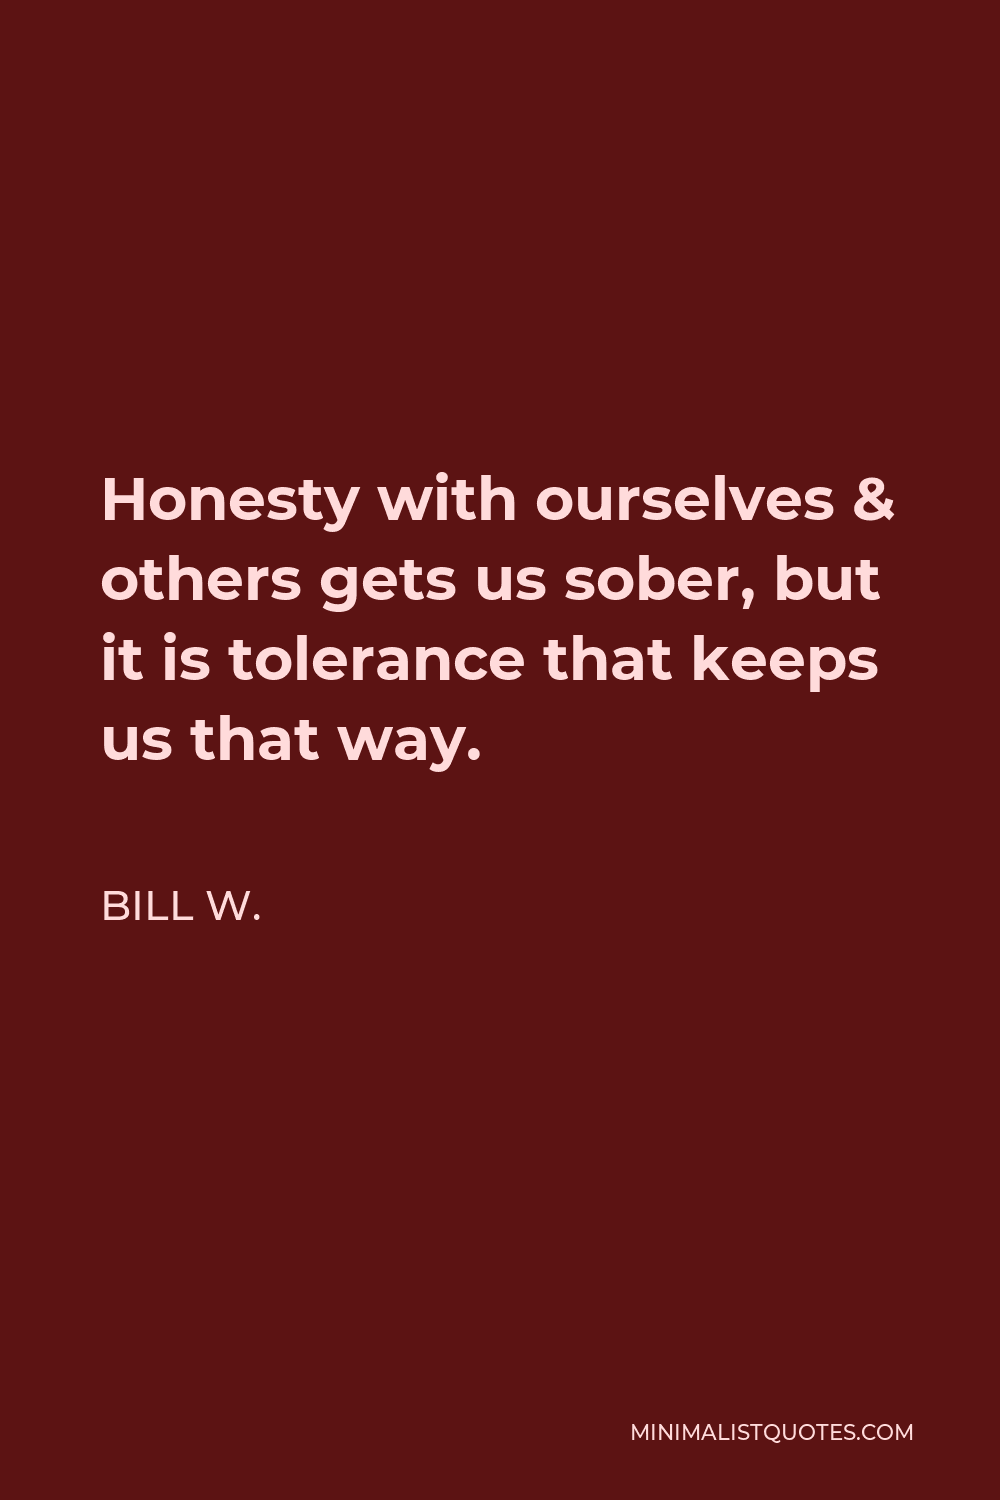 Bill W. Quote - Honesty with ourselves & others gets us sober, but it is tolerance that keeps us that way.